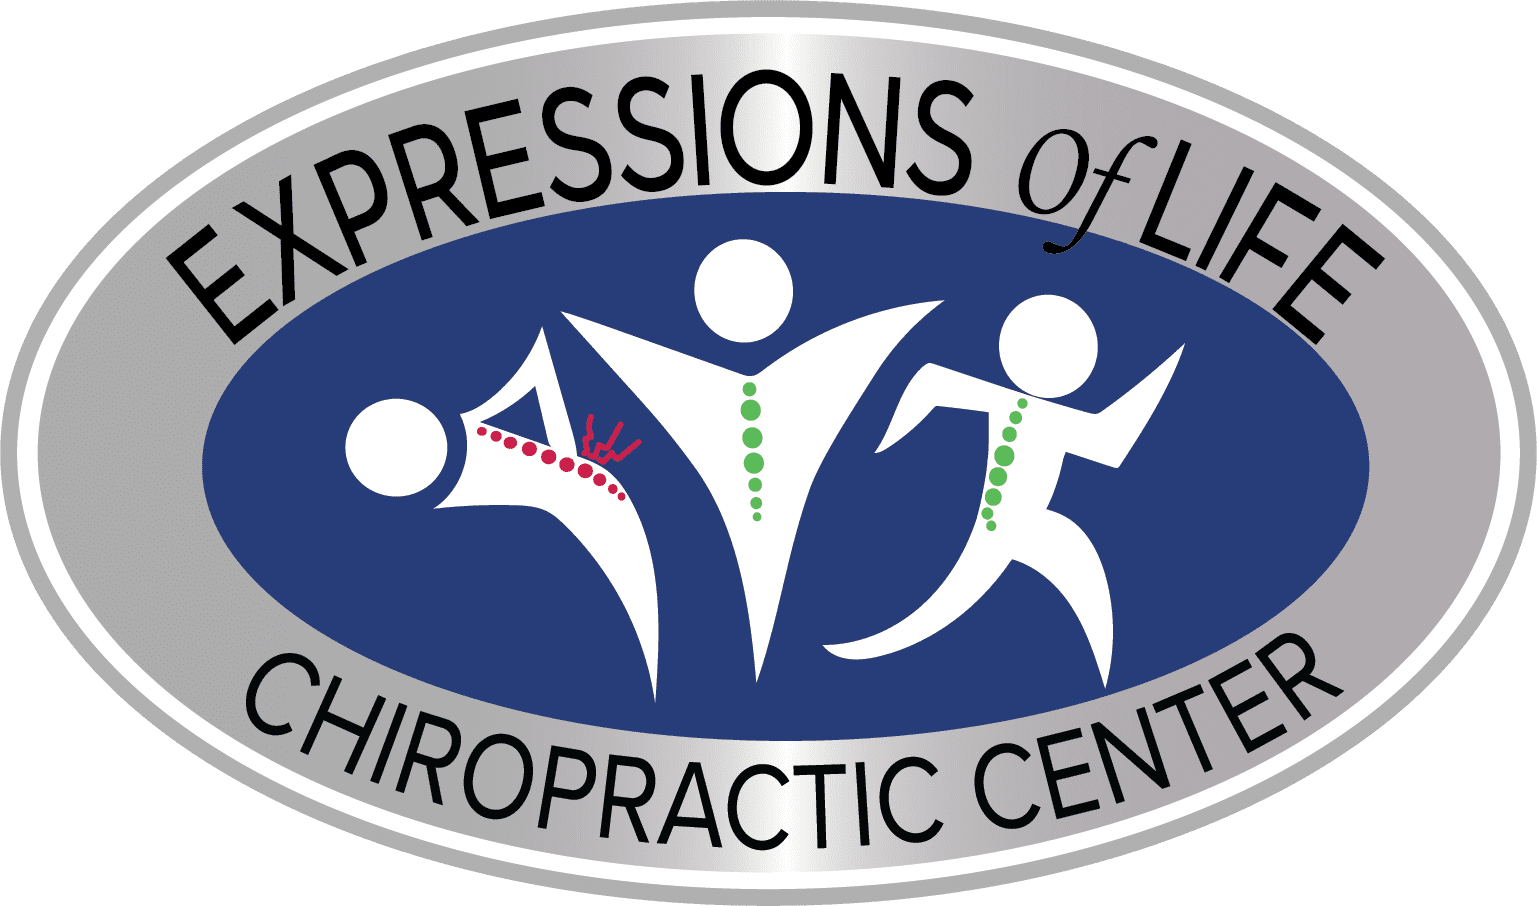 Expressions of Life Chiropractic Center